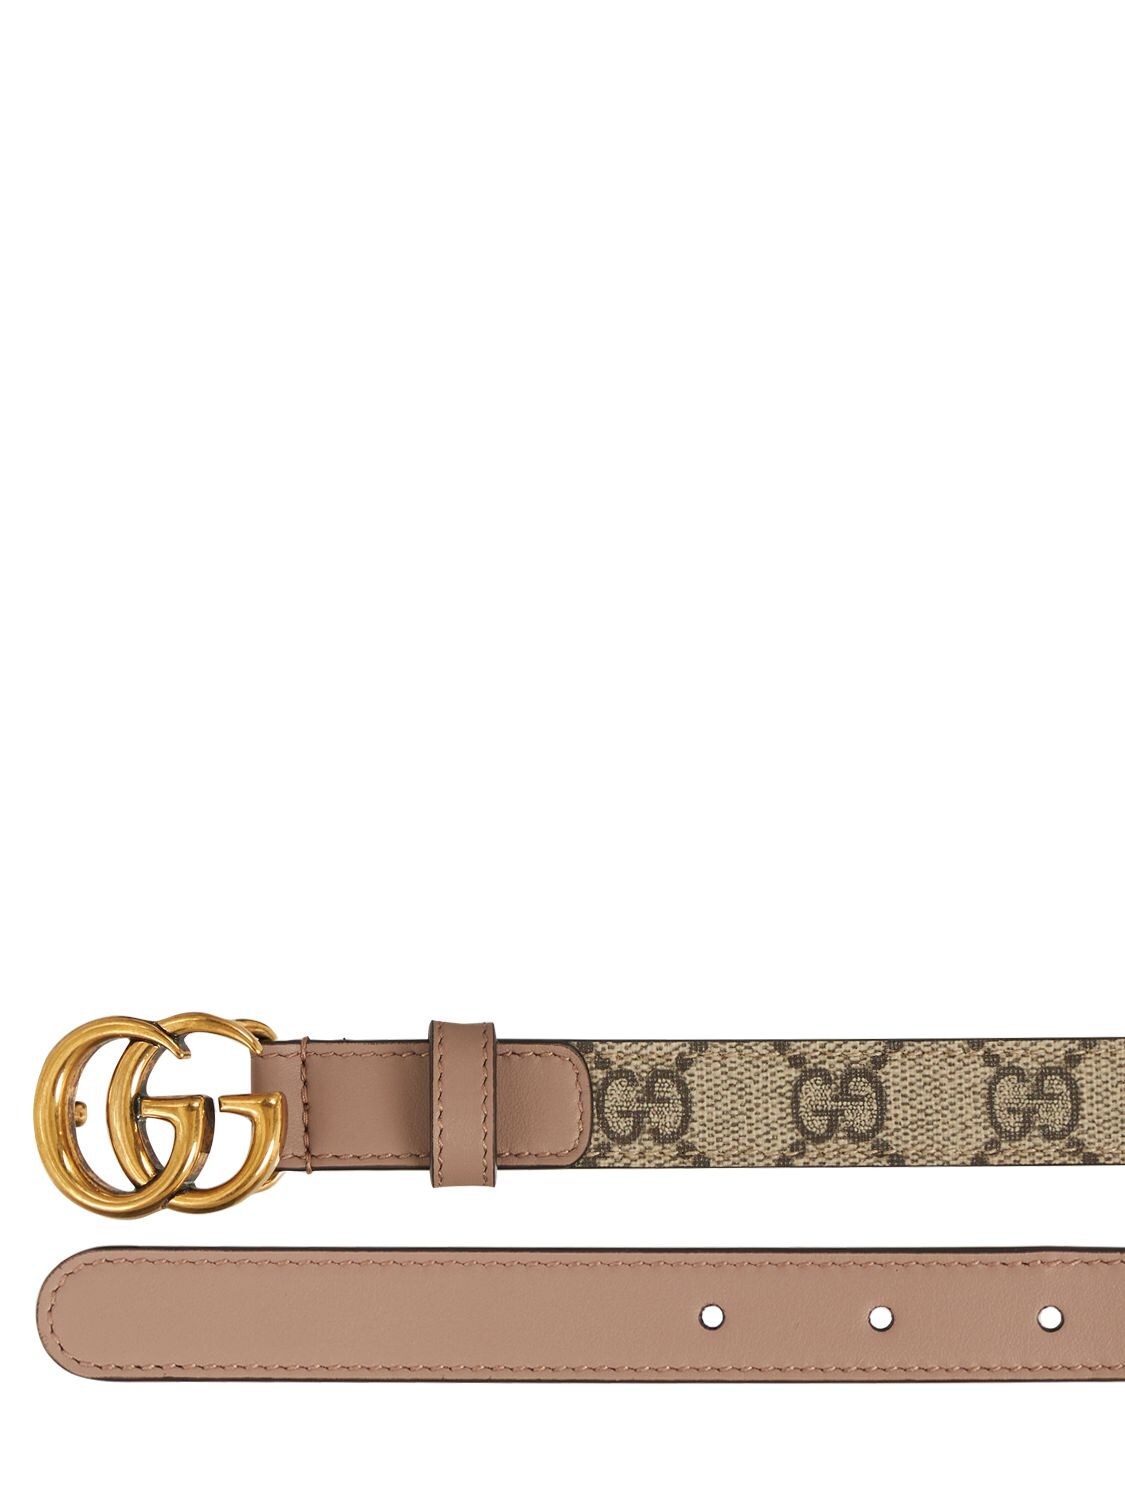 GG Marmont thin belt in pink canvas